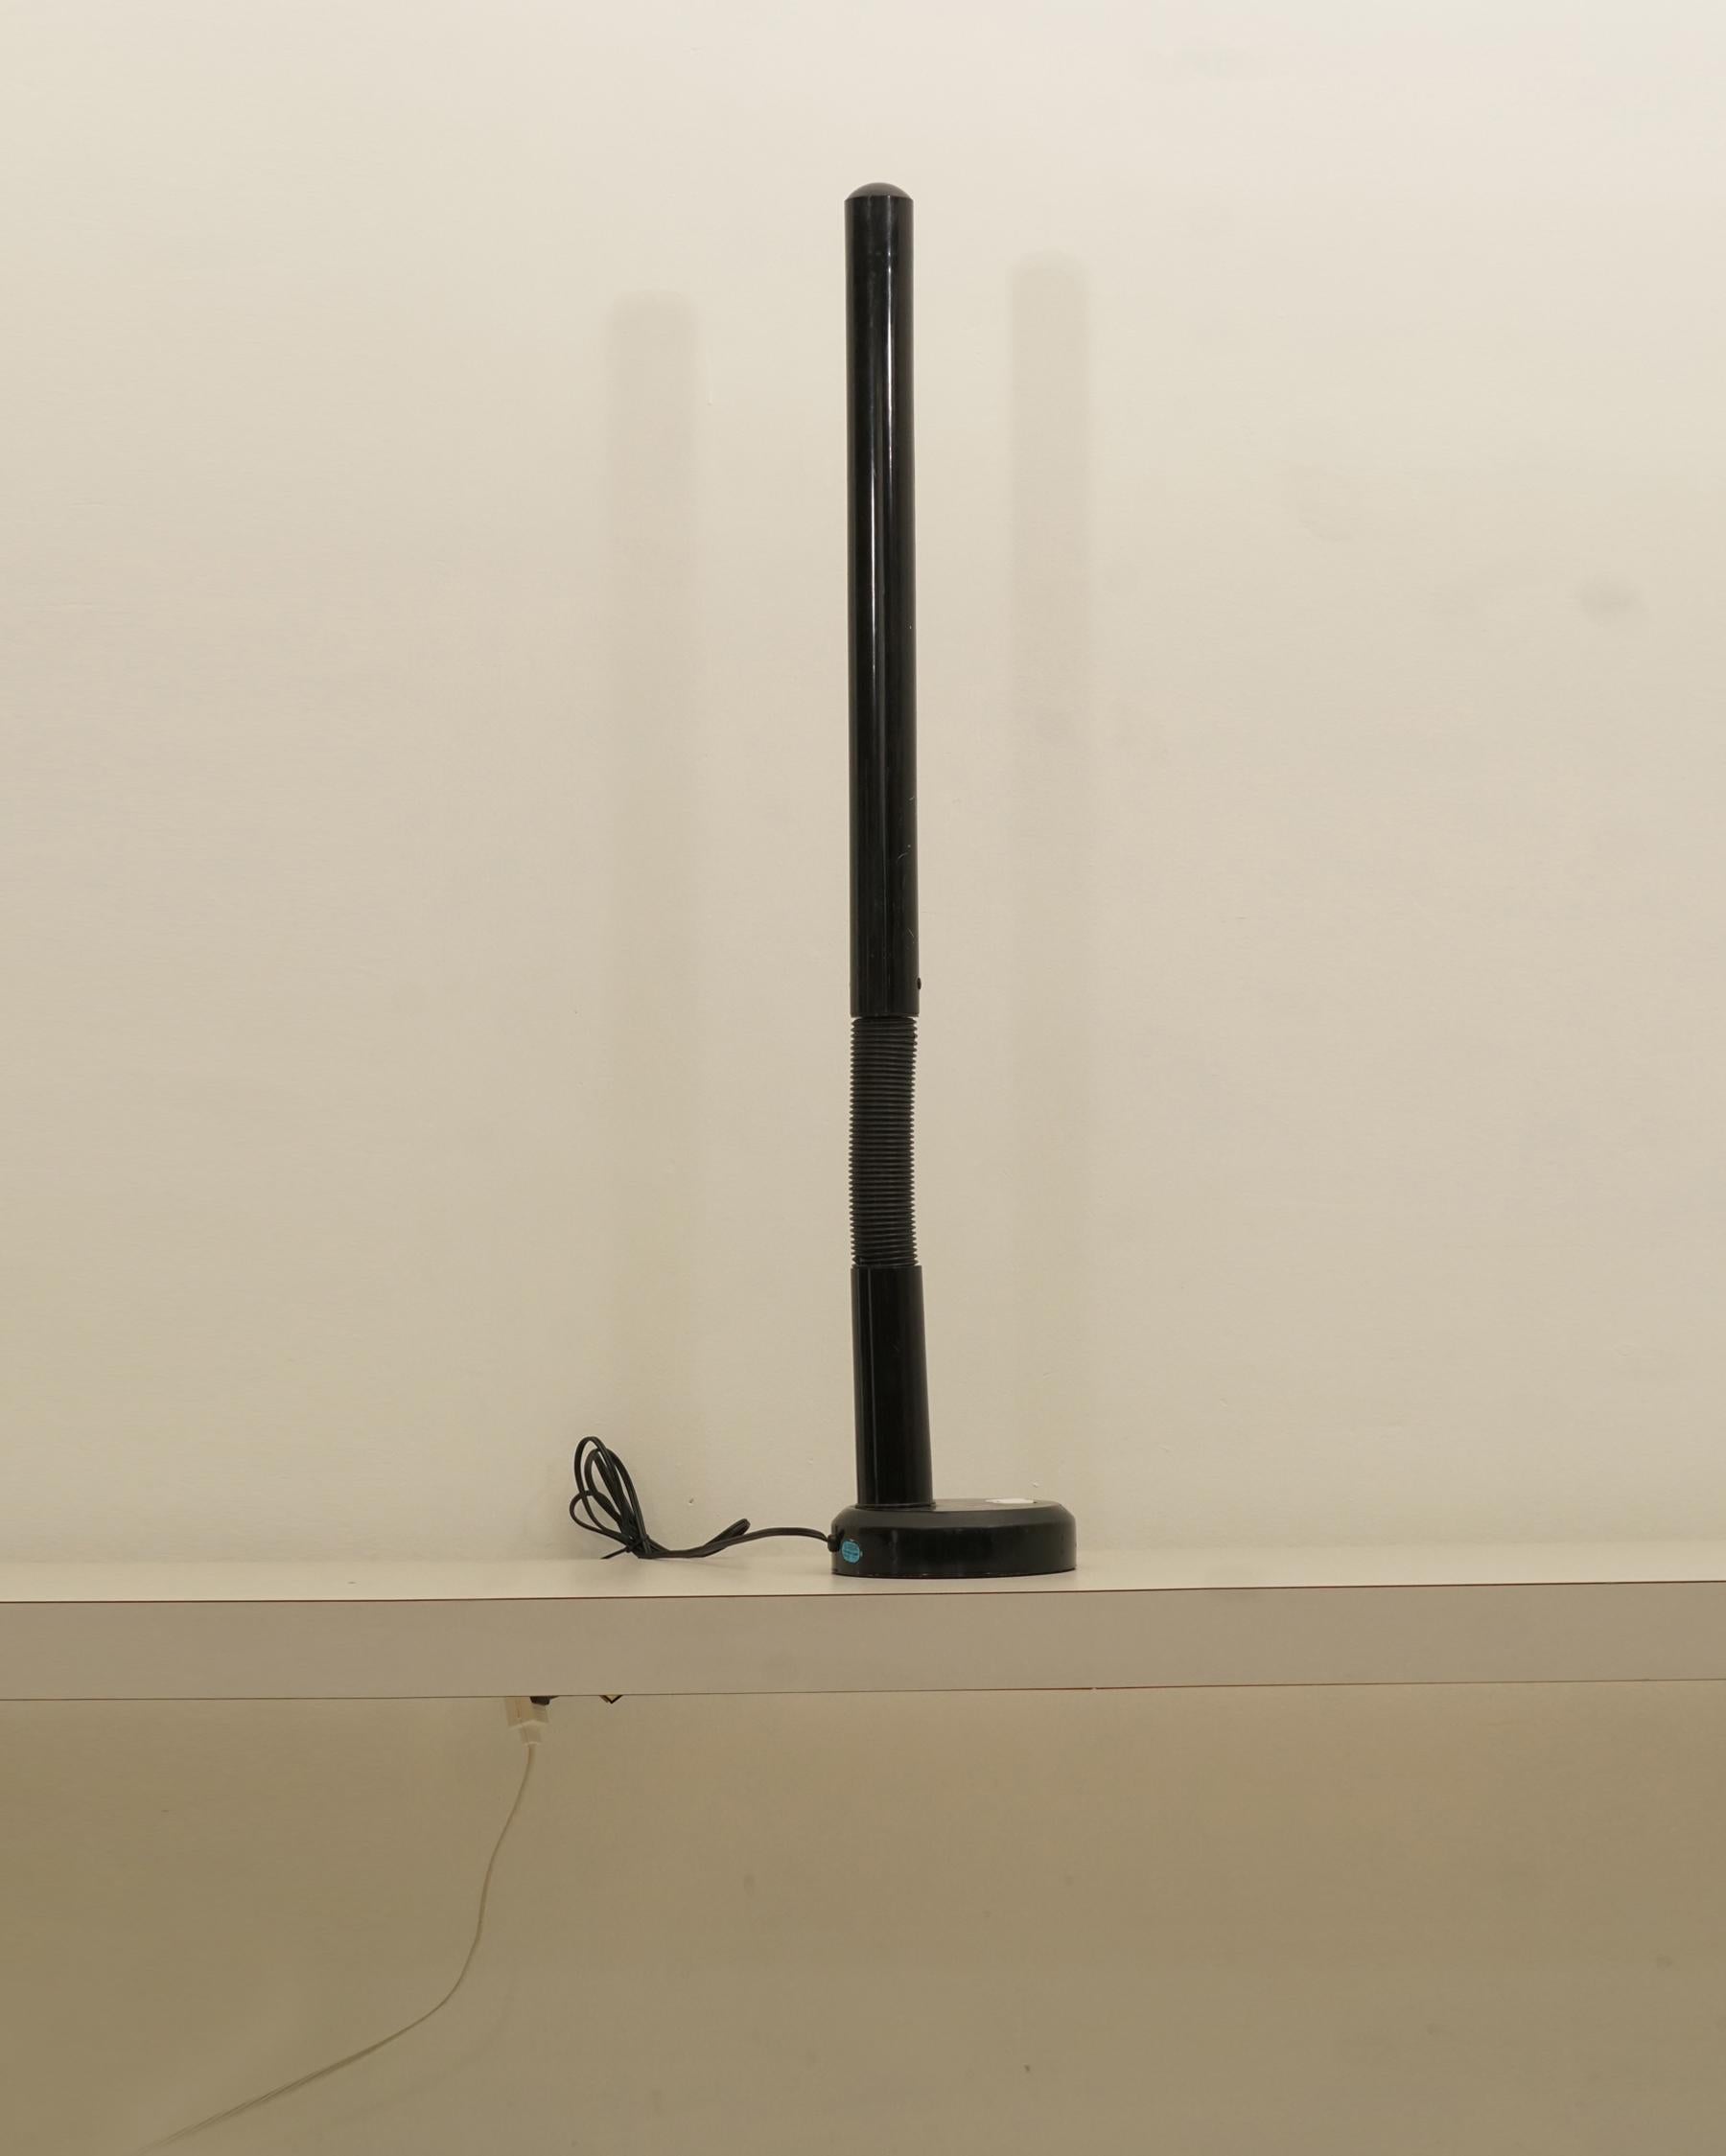 Late 20th Century 1970s Black Space Age Tubular Desk Lamp in the Style of Anders Pehrson’s “Tuben”